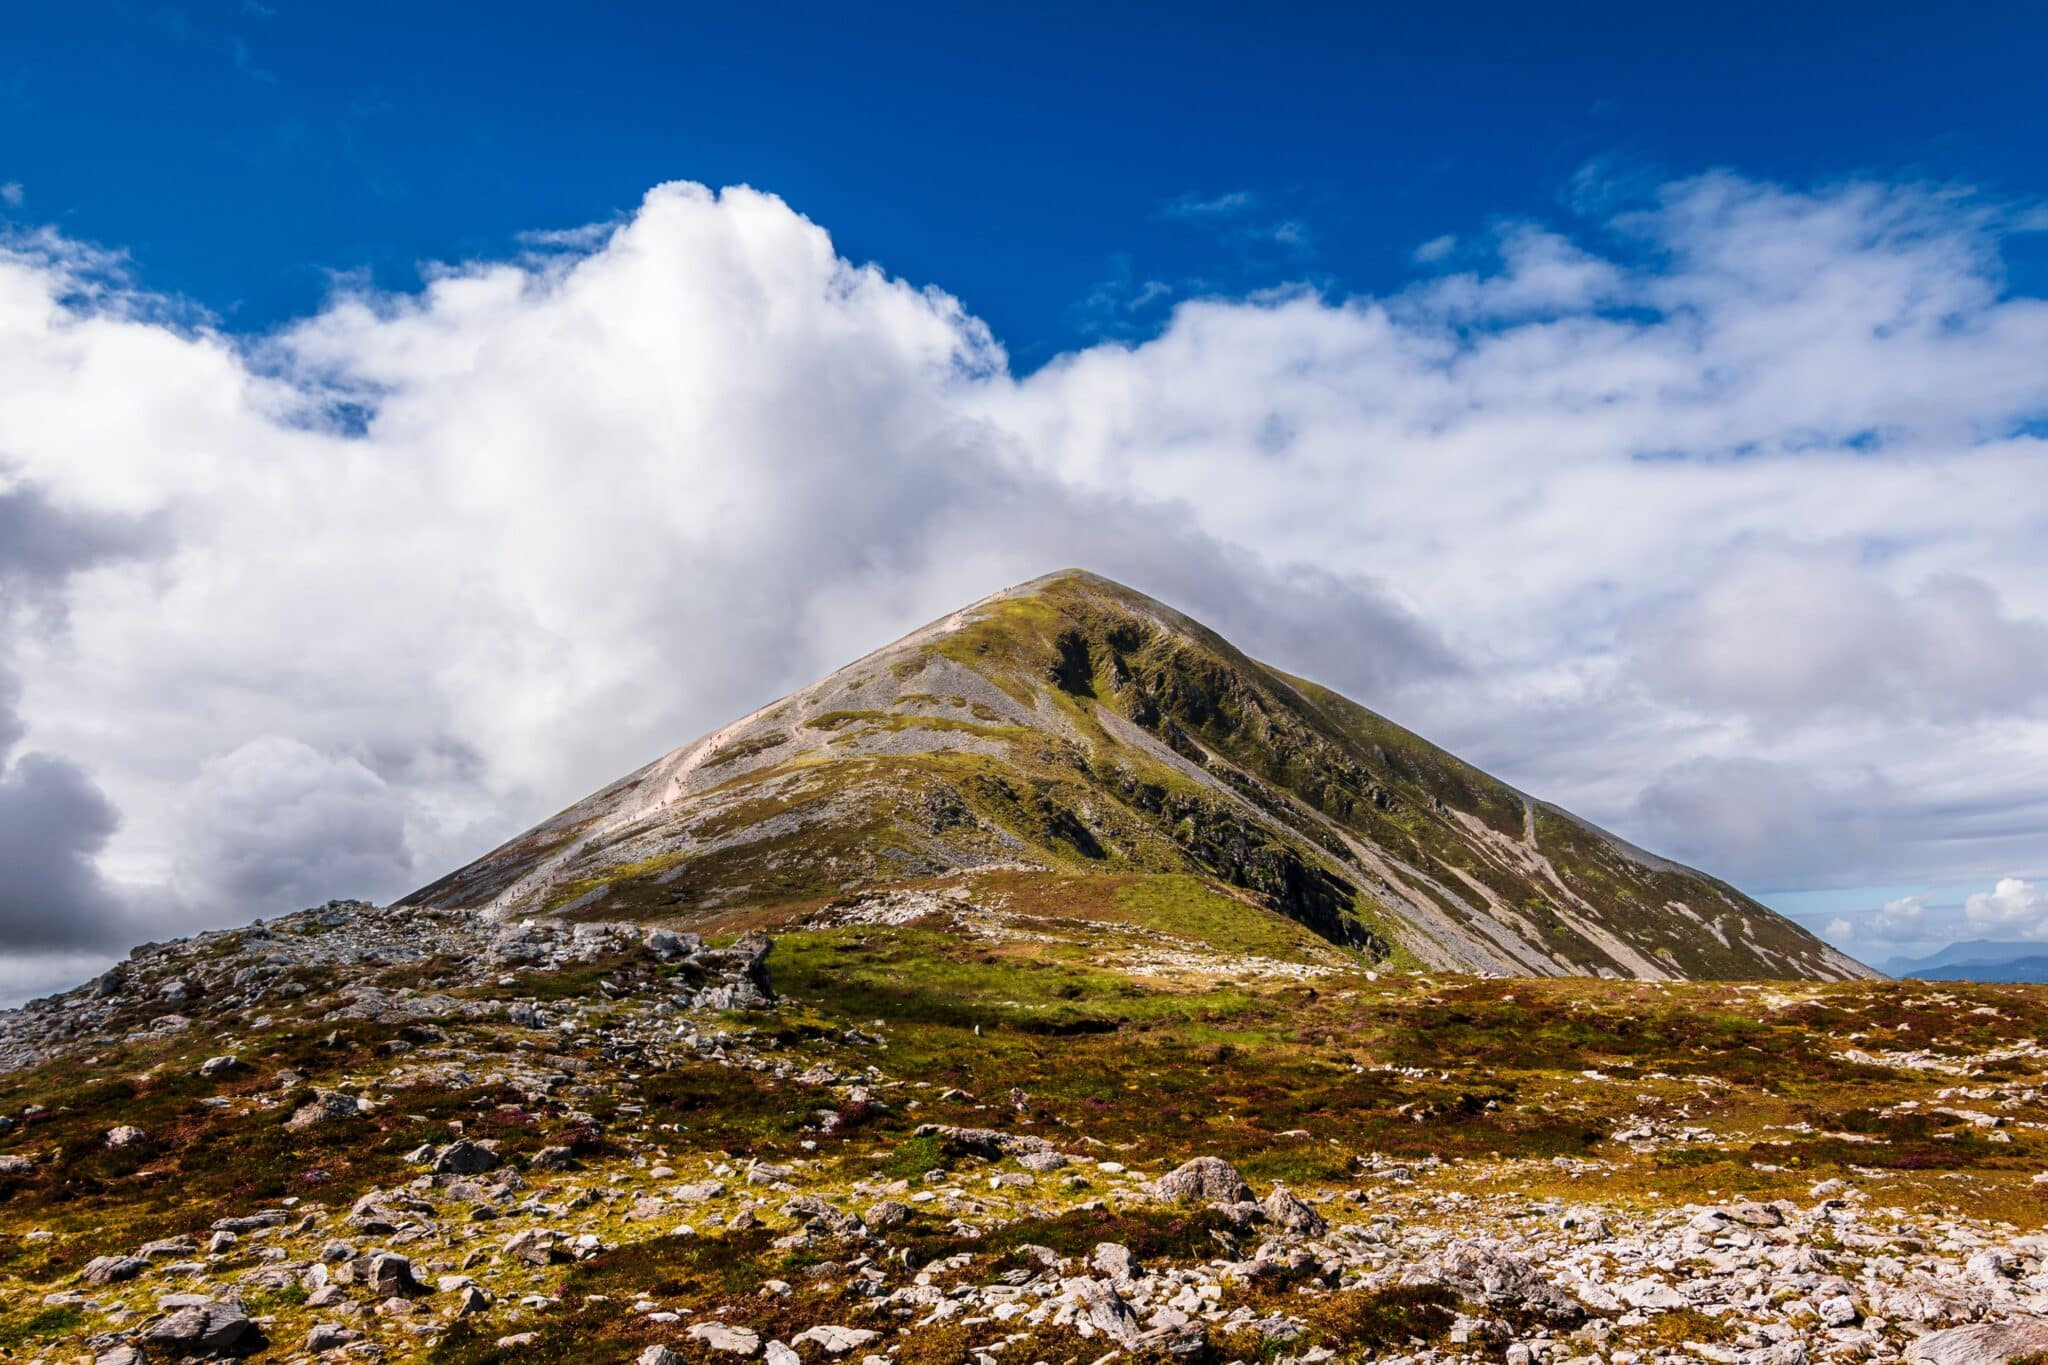 Ireland guided hiking tour image of Croagh Patrick